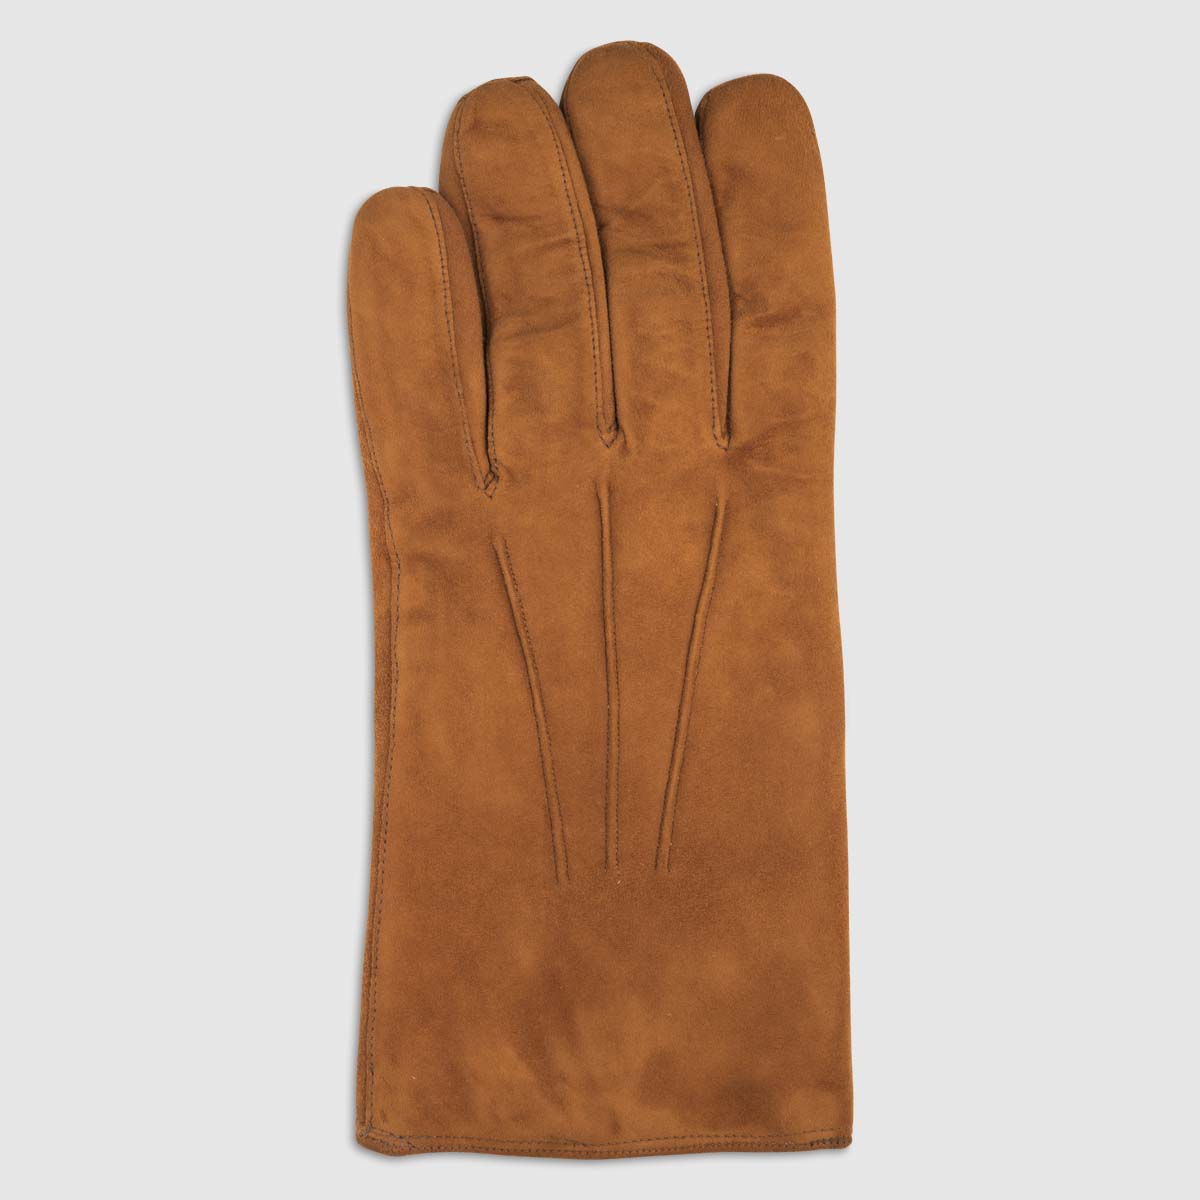 Suede Glove with Rabbit Fur Lining in Camel – 9.5